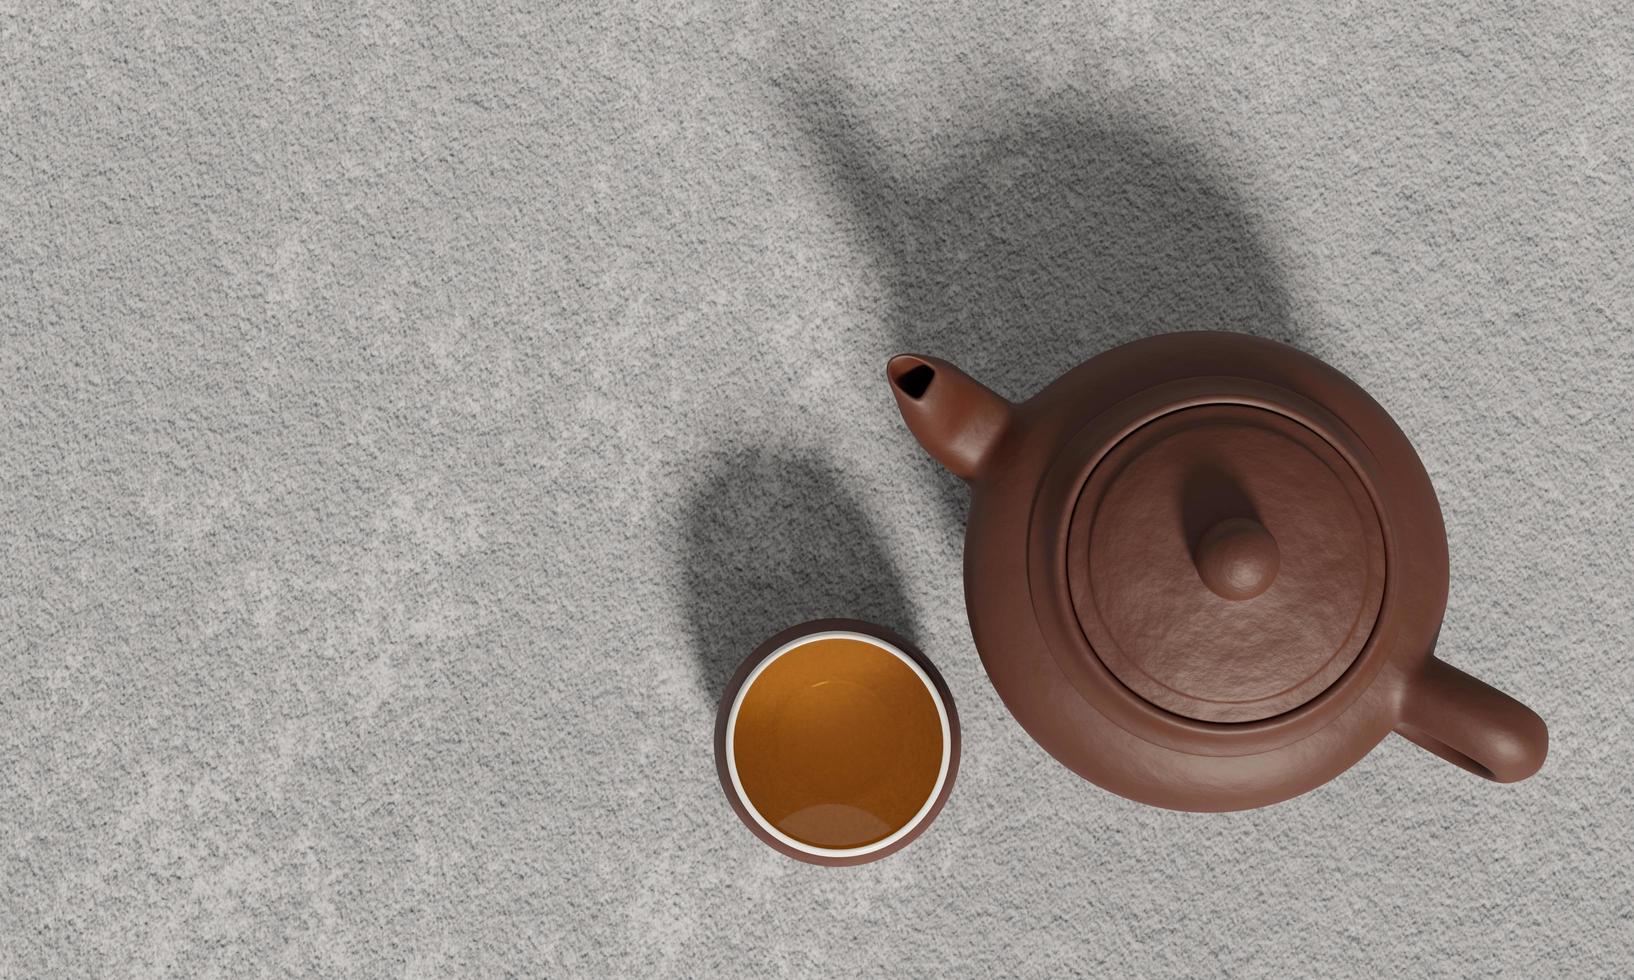 Brown clay teapot And a teacup or clay teacup, white inside with golden yellow tea Placed on the cement surface or White plaster has a shadowed object caused by sunlight. 3D rendering. photo